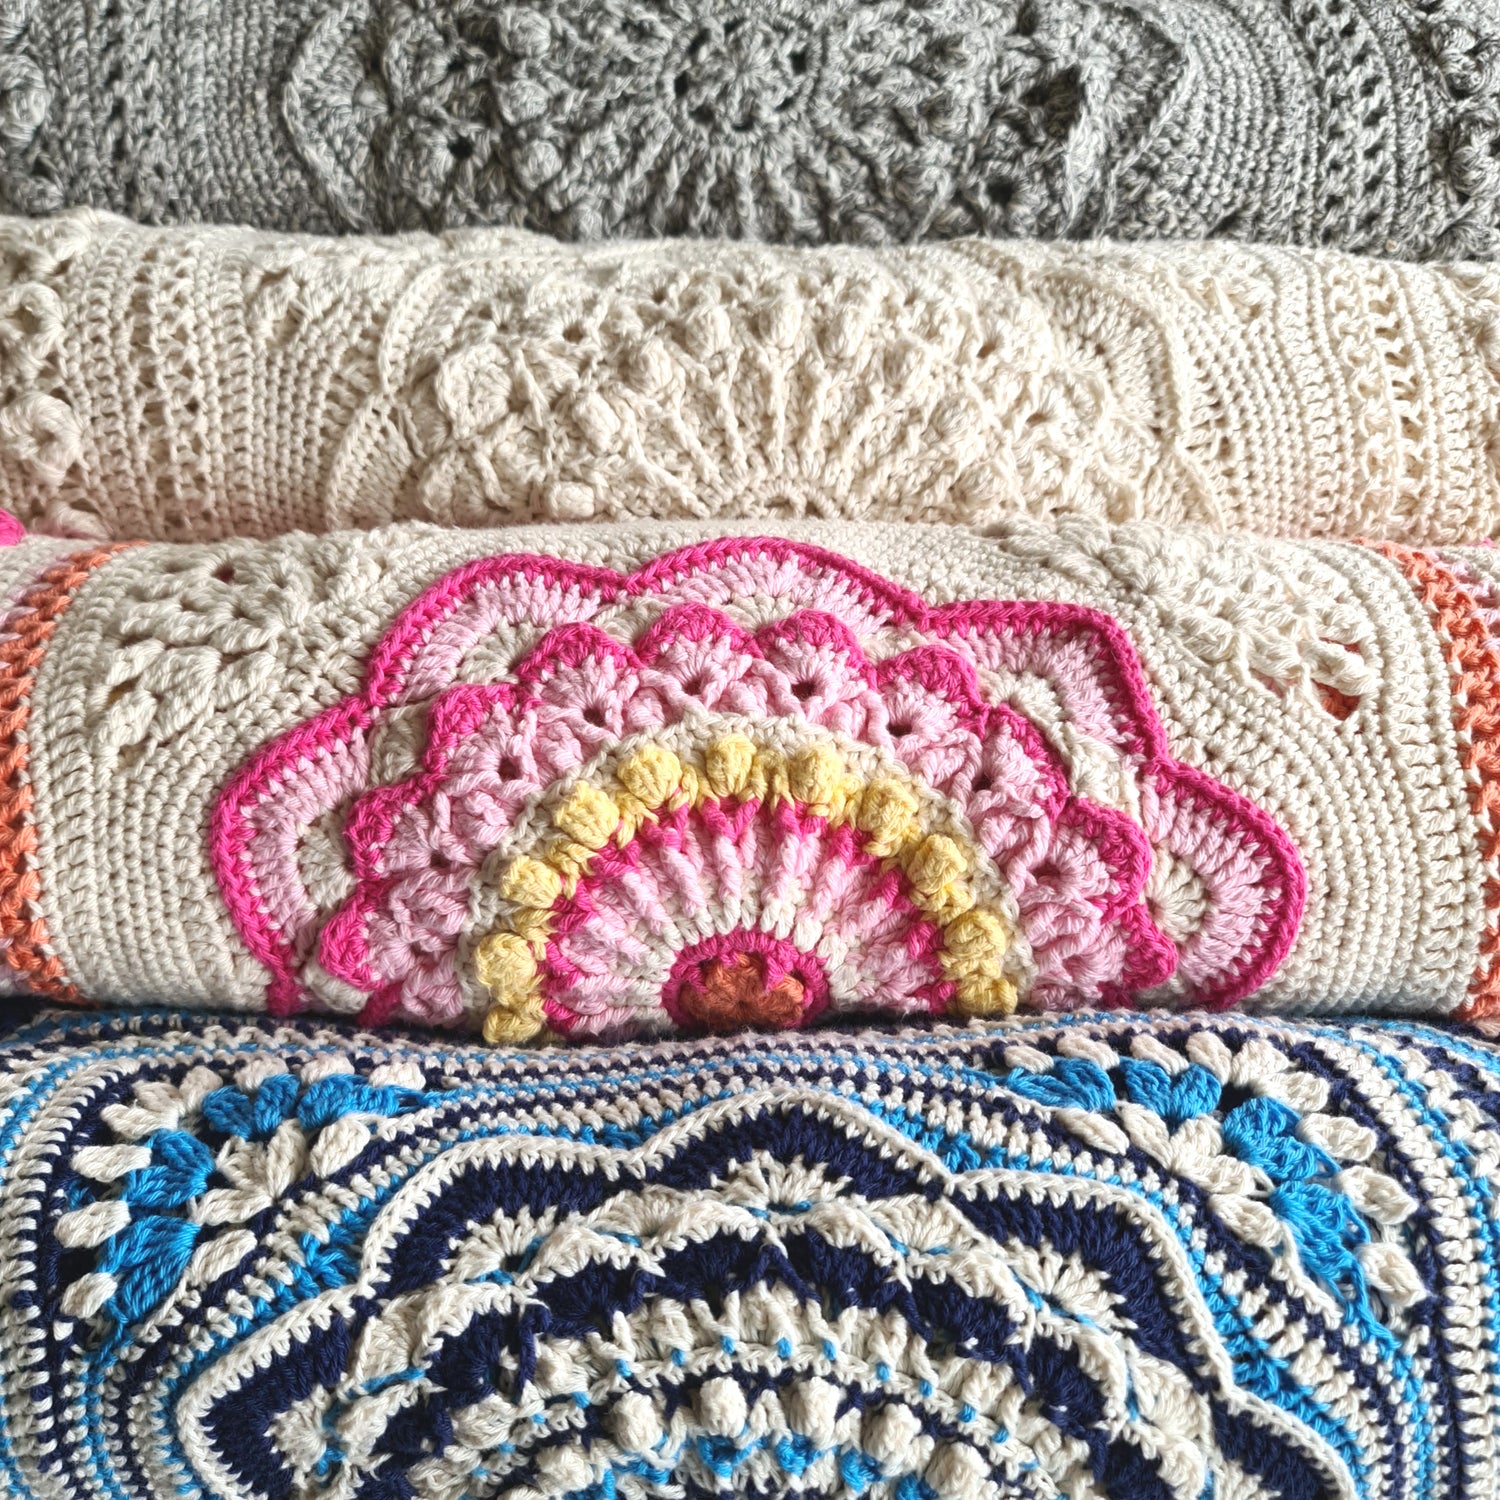 Four folded Nimue blankets showing the fold are shown horizontally. From top, a luxe mid-grey suri alpaca and merino blend blanket, a cream cotton blanket, a colourful pink and cream with hints of yellow and orange version  and a bright blue, navy and cream version at the bottom.